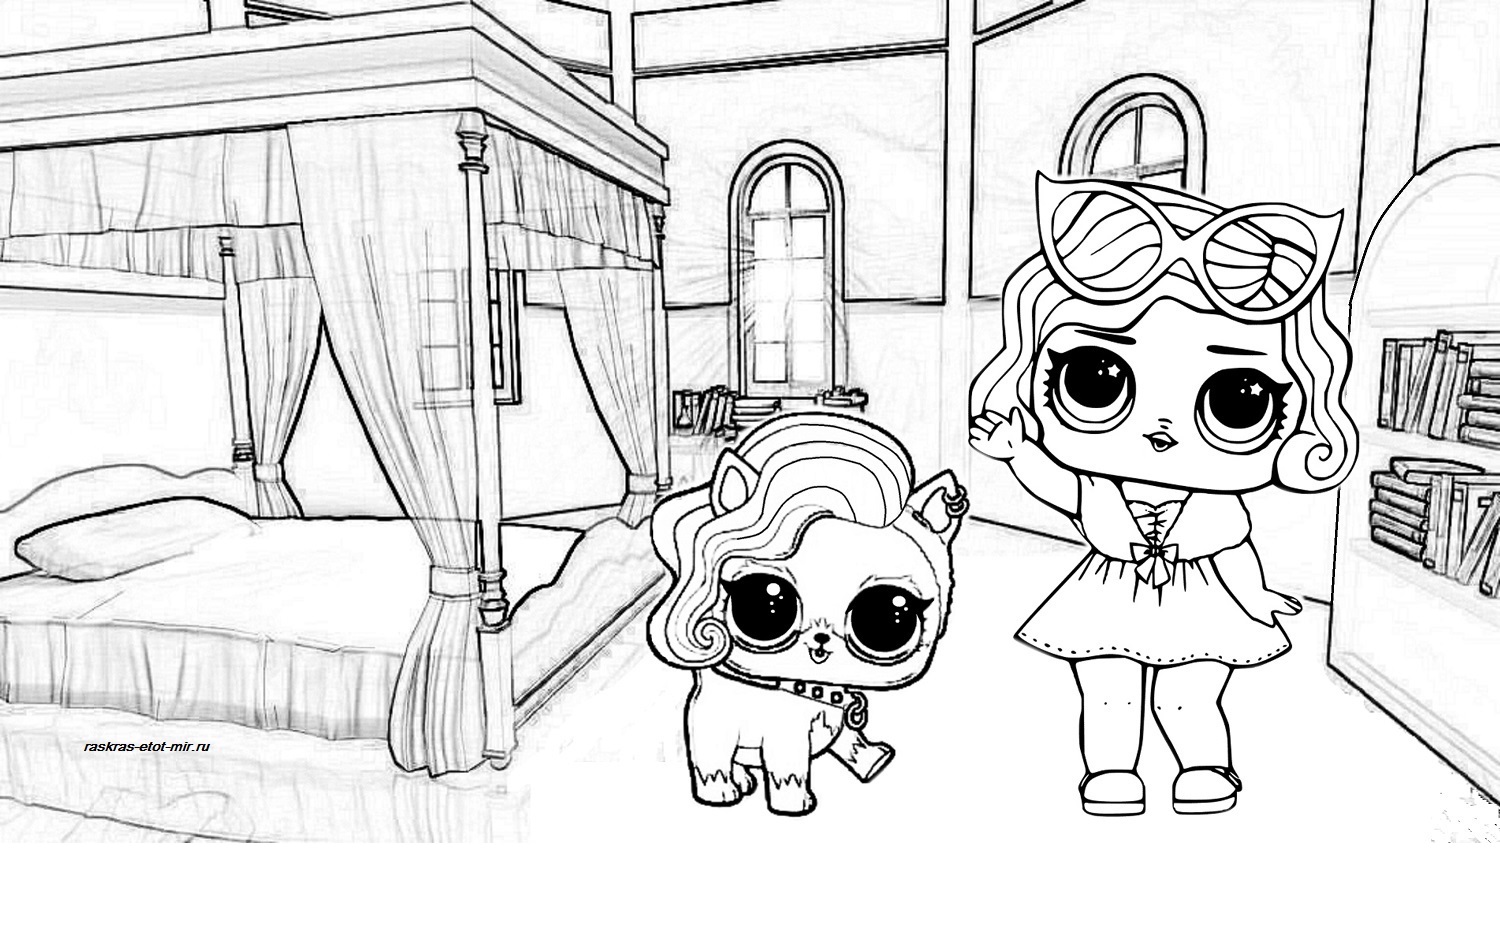 Coloring Pages of LOL Surprise Dolls. 80 Pieces of Black ...